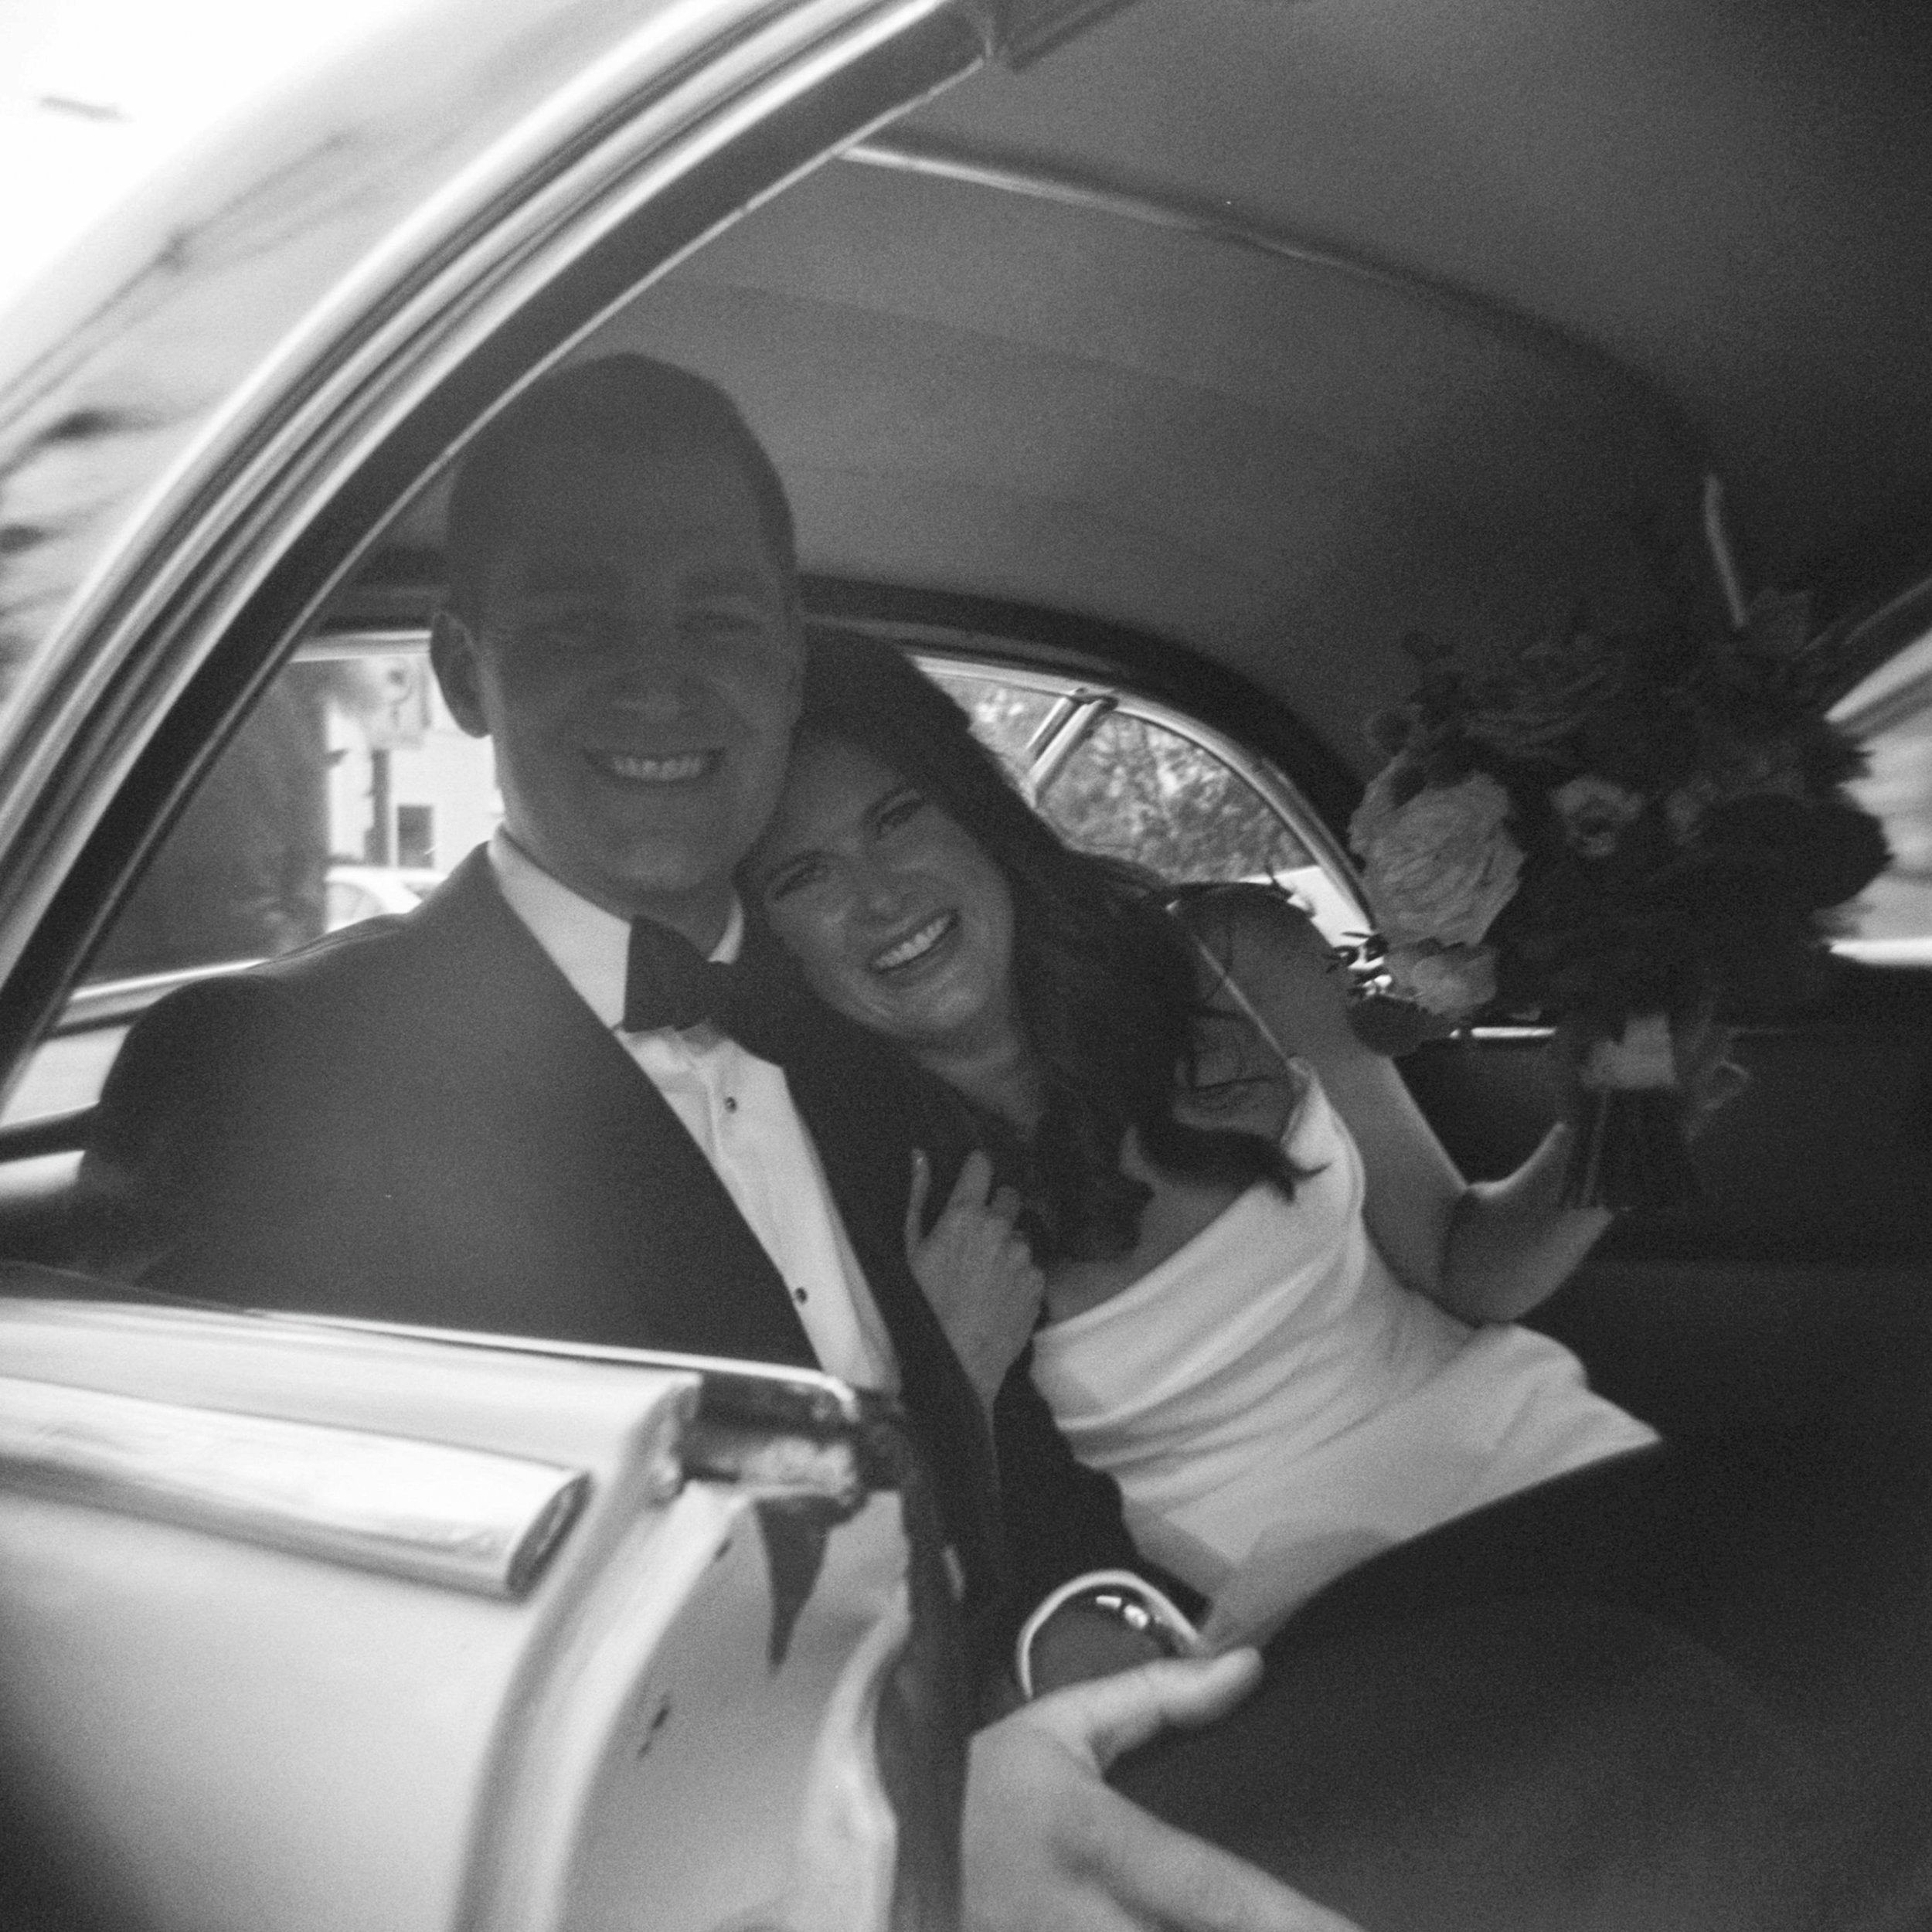 Black and white film photo of bride and groom in vintage car